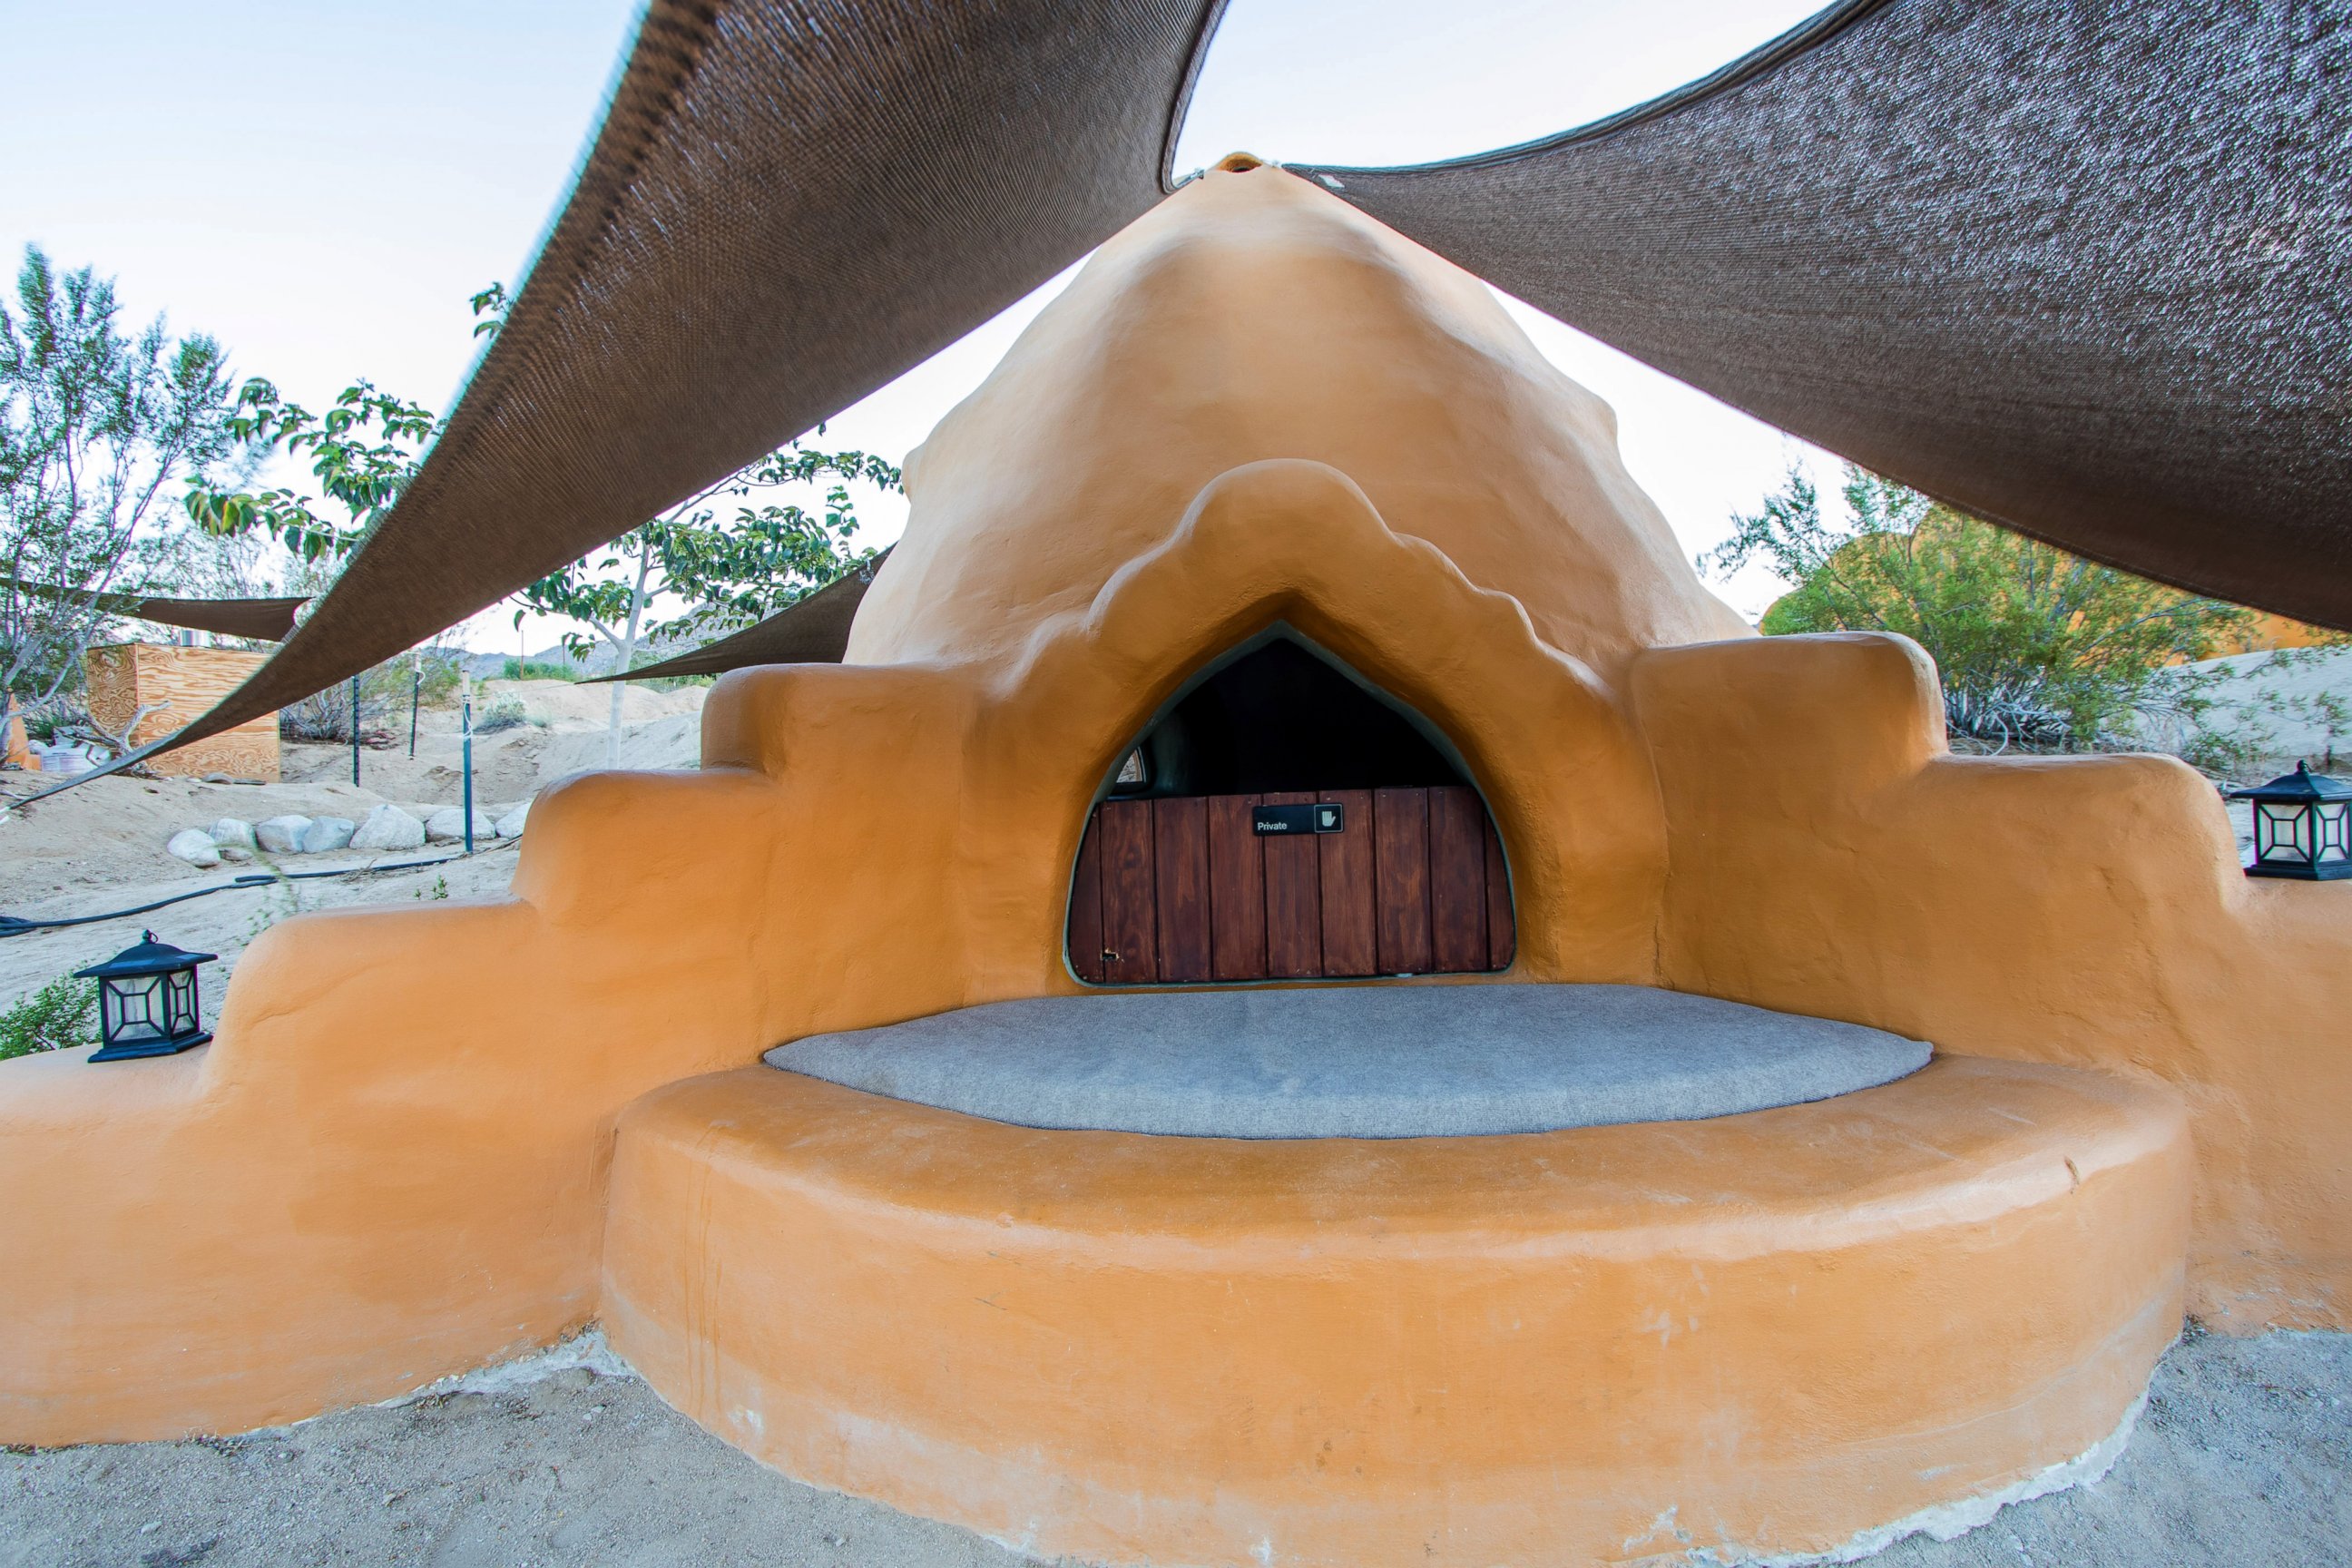 PHOTO: The Earth Dome in Joshua Tree, California is $85 per night for two guests.